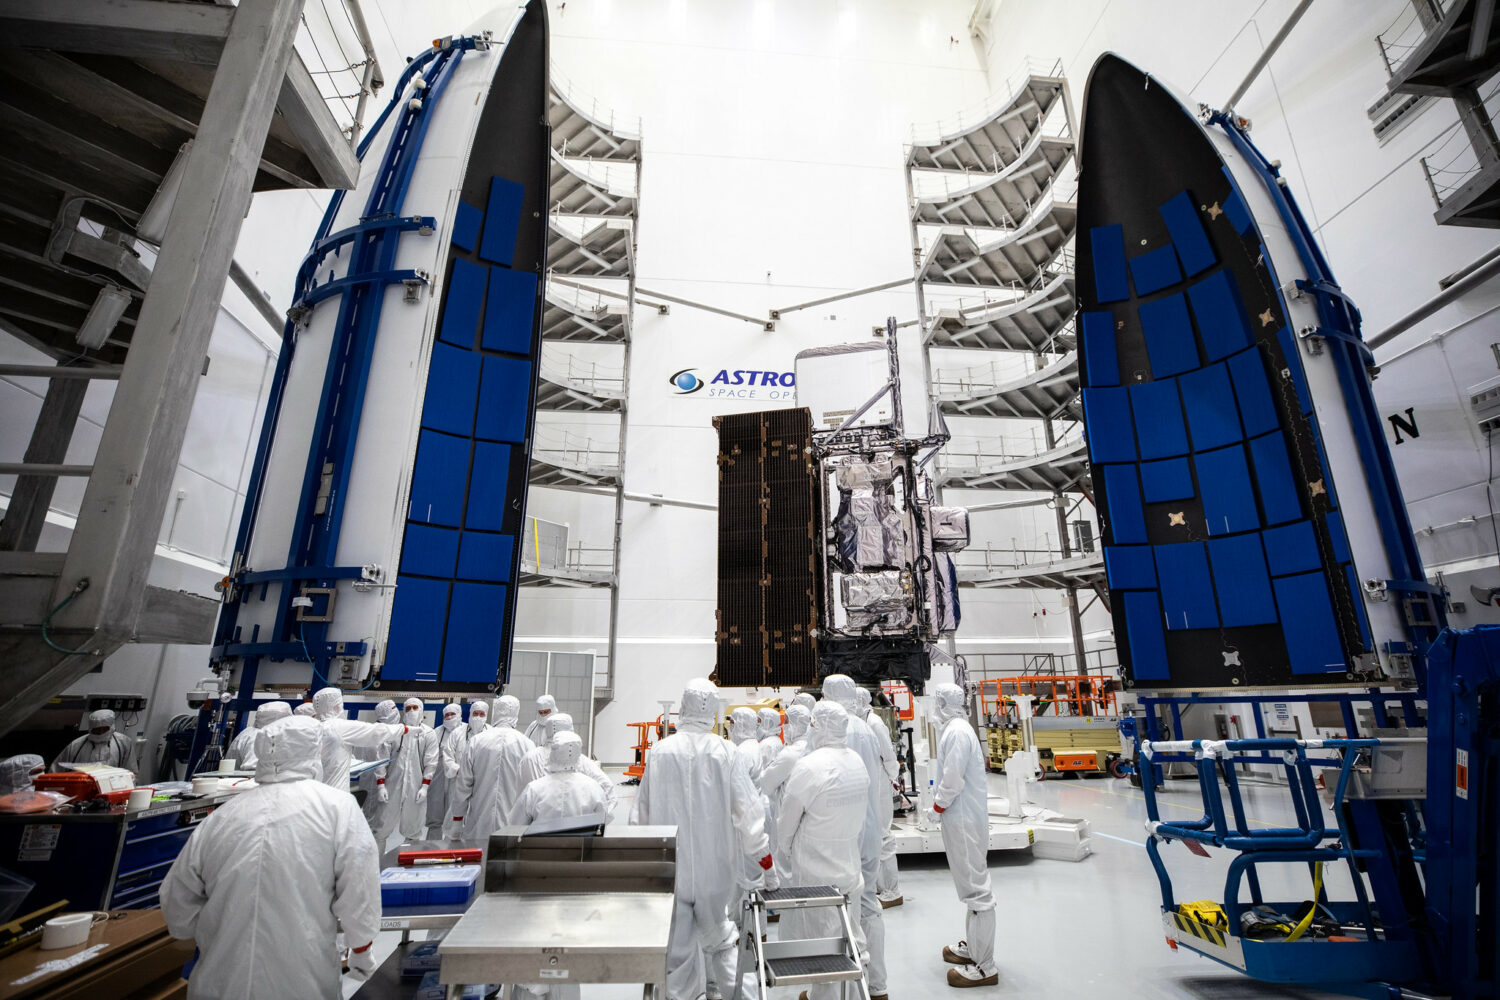 Advanced new GOES-T weather satellite is ‘go’ for launch on March 1, NASA says